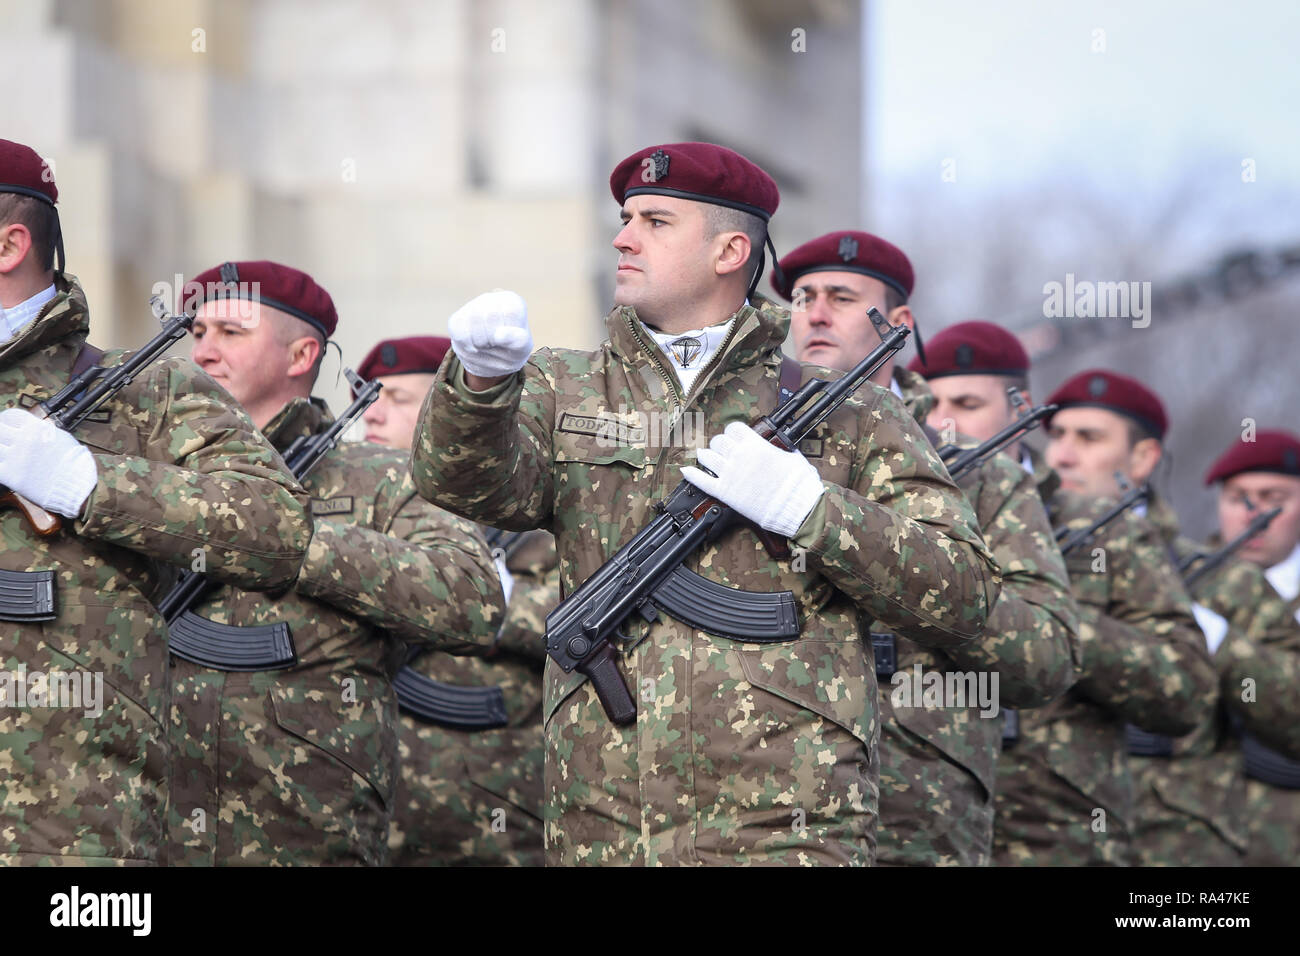 Bucharest, Romania - December 1, 2018: Romanian army soldiers, armed with AK-47 assault rifles, take part at the Romanian National Day military parade Stock Photo